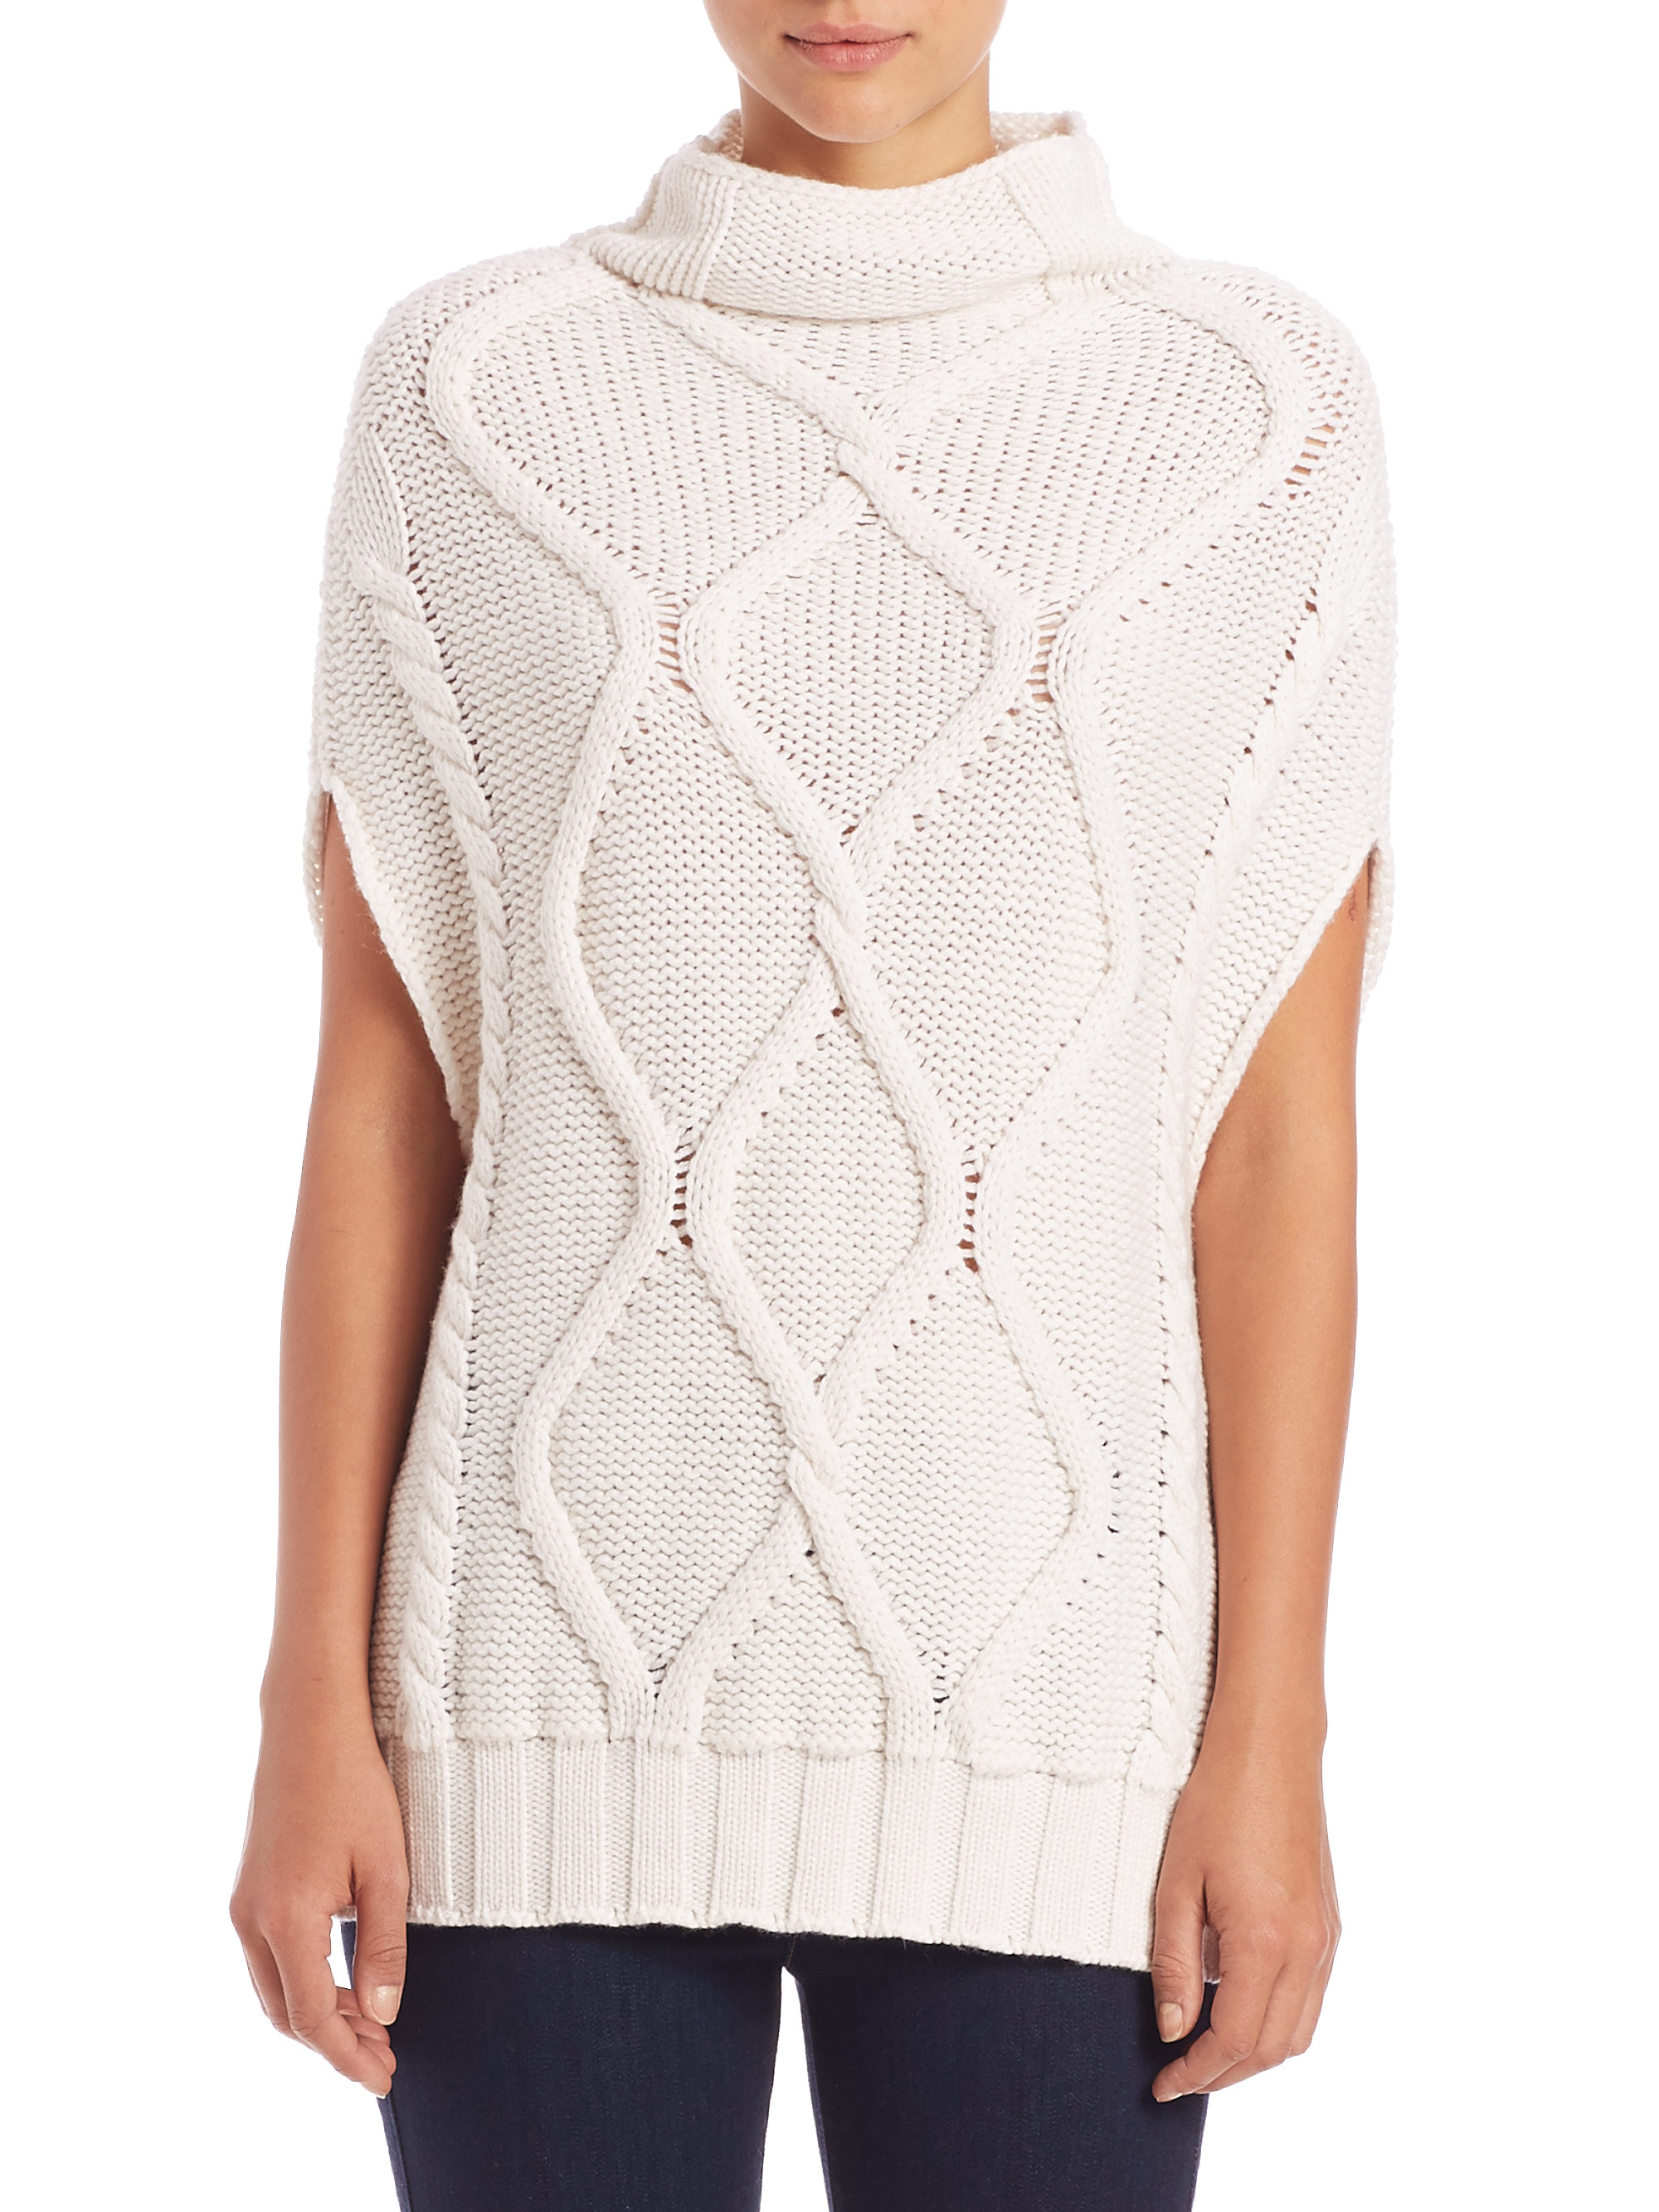 Eleventy Wool Cable-knit Turtleneck Sweater in White for Men - Lyst